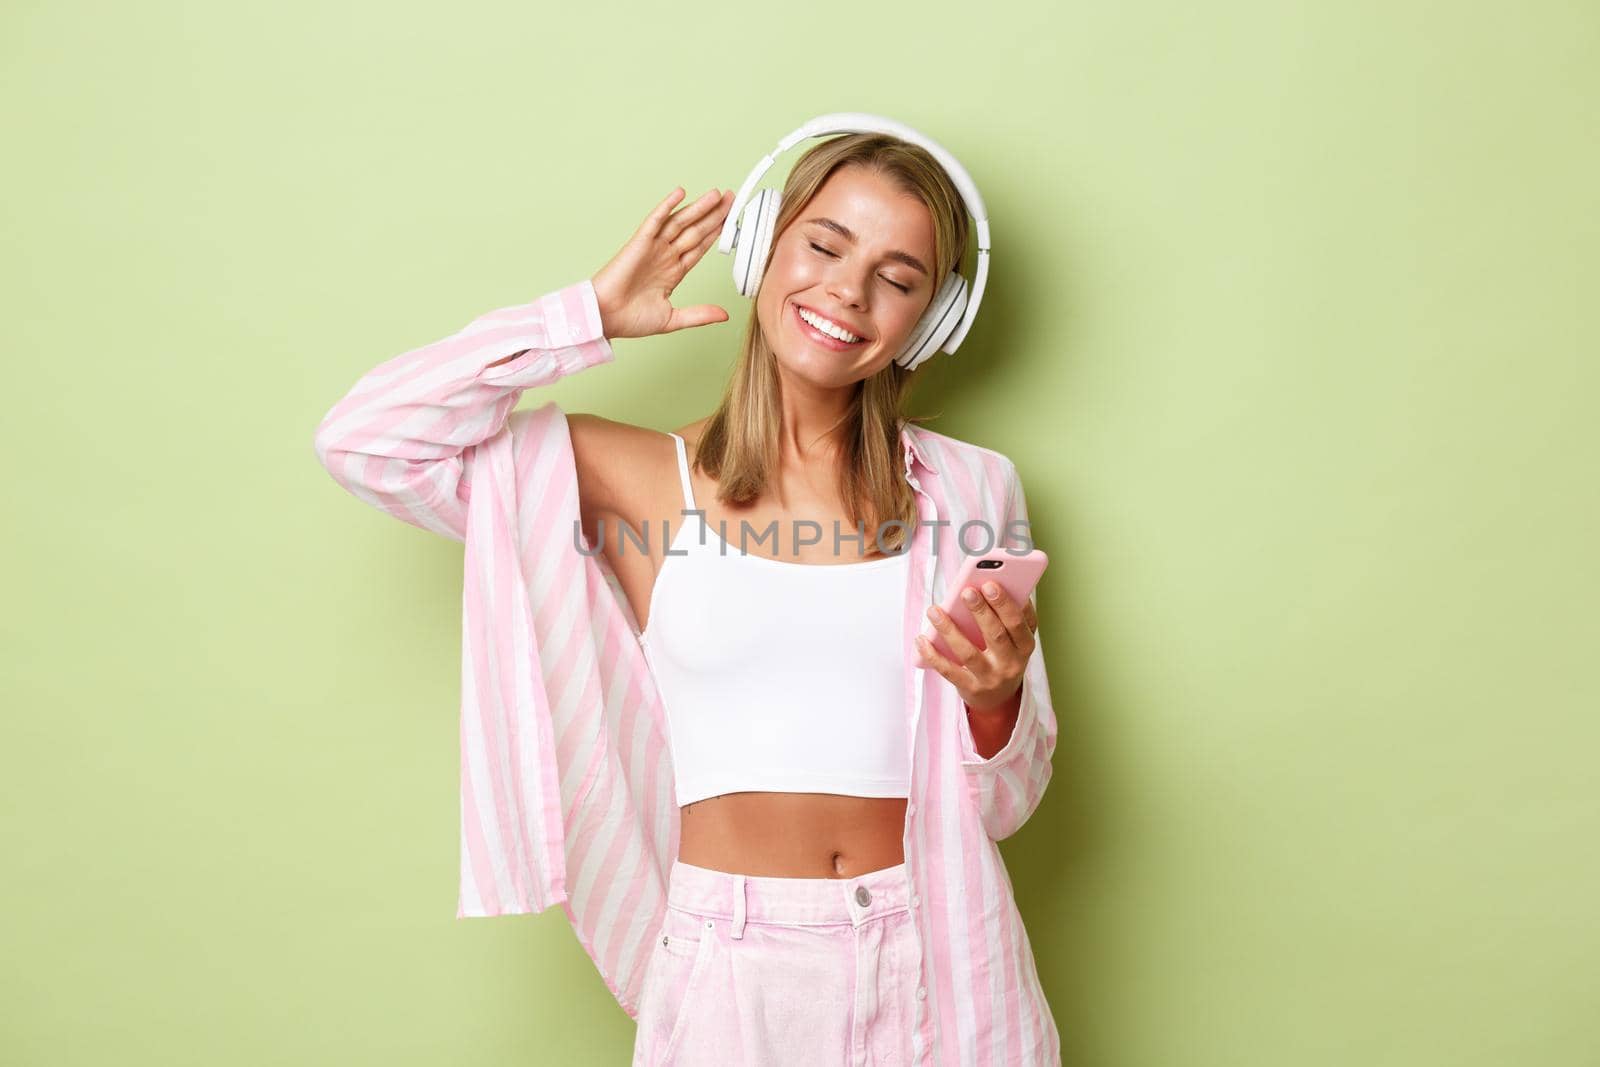 Portrait of attractive happy woman with blond short hair, wearing pink shirt, listening music in wireless headphones and smiling, holding mobile phone, standing over green background.